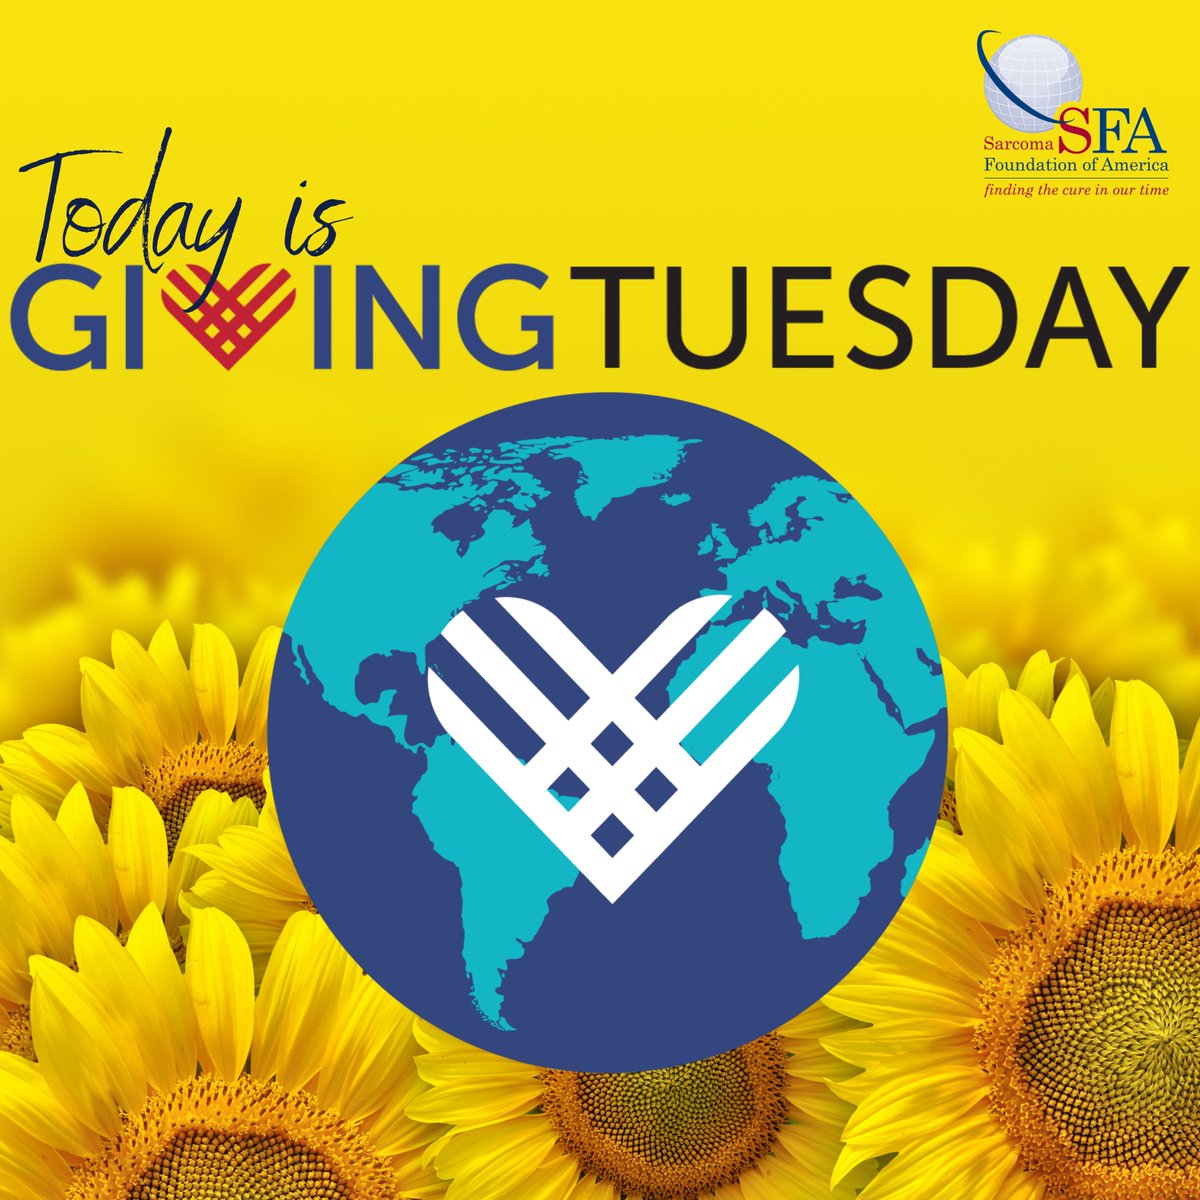 Our goal of $33,478 will provide needed funds to support vital research necessary to find lifesaving treatments for sarcoma patients. If our goal is met, SFA will award a research grant named SFA GivingTuesday in honor of those who support this initiative.
p2p.onecause.com/sfagivingtuesd…